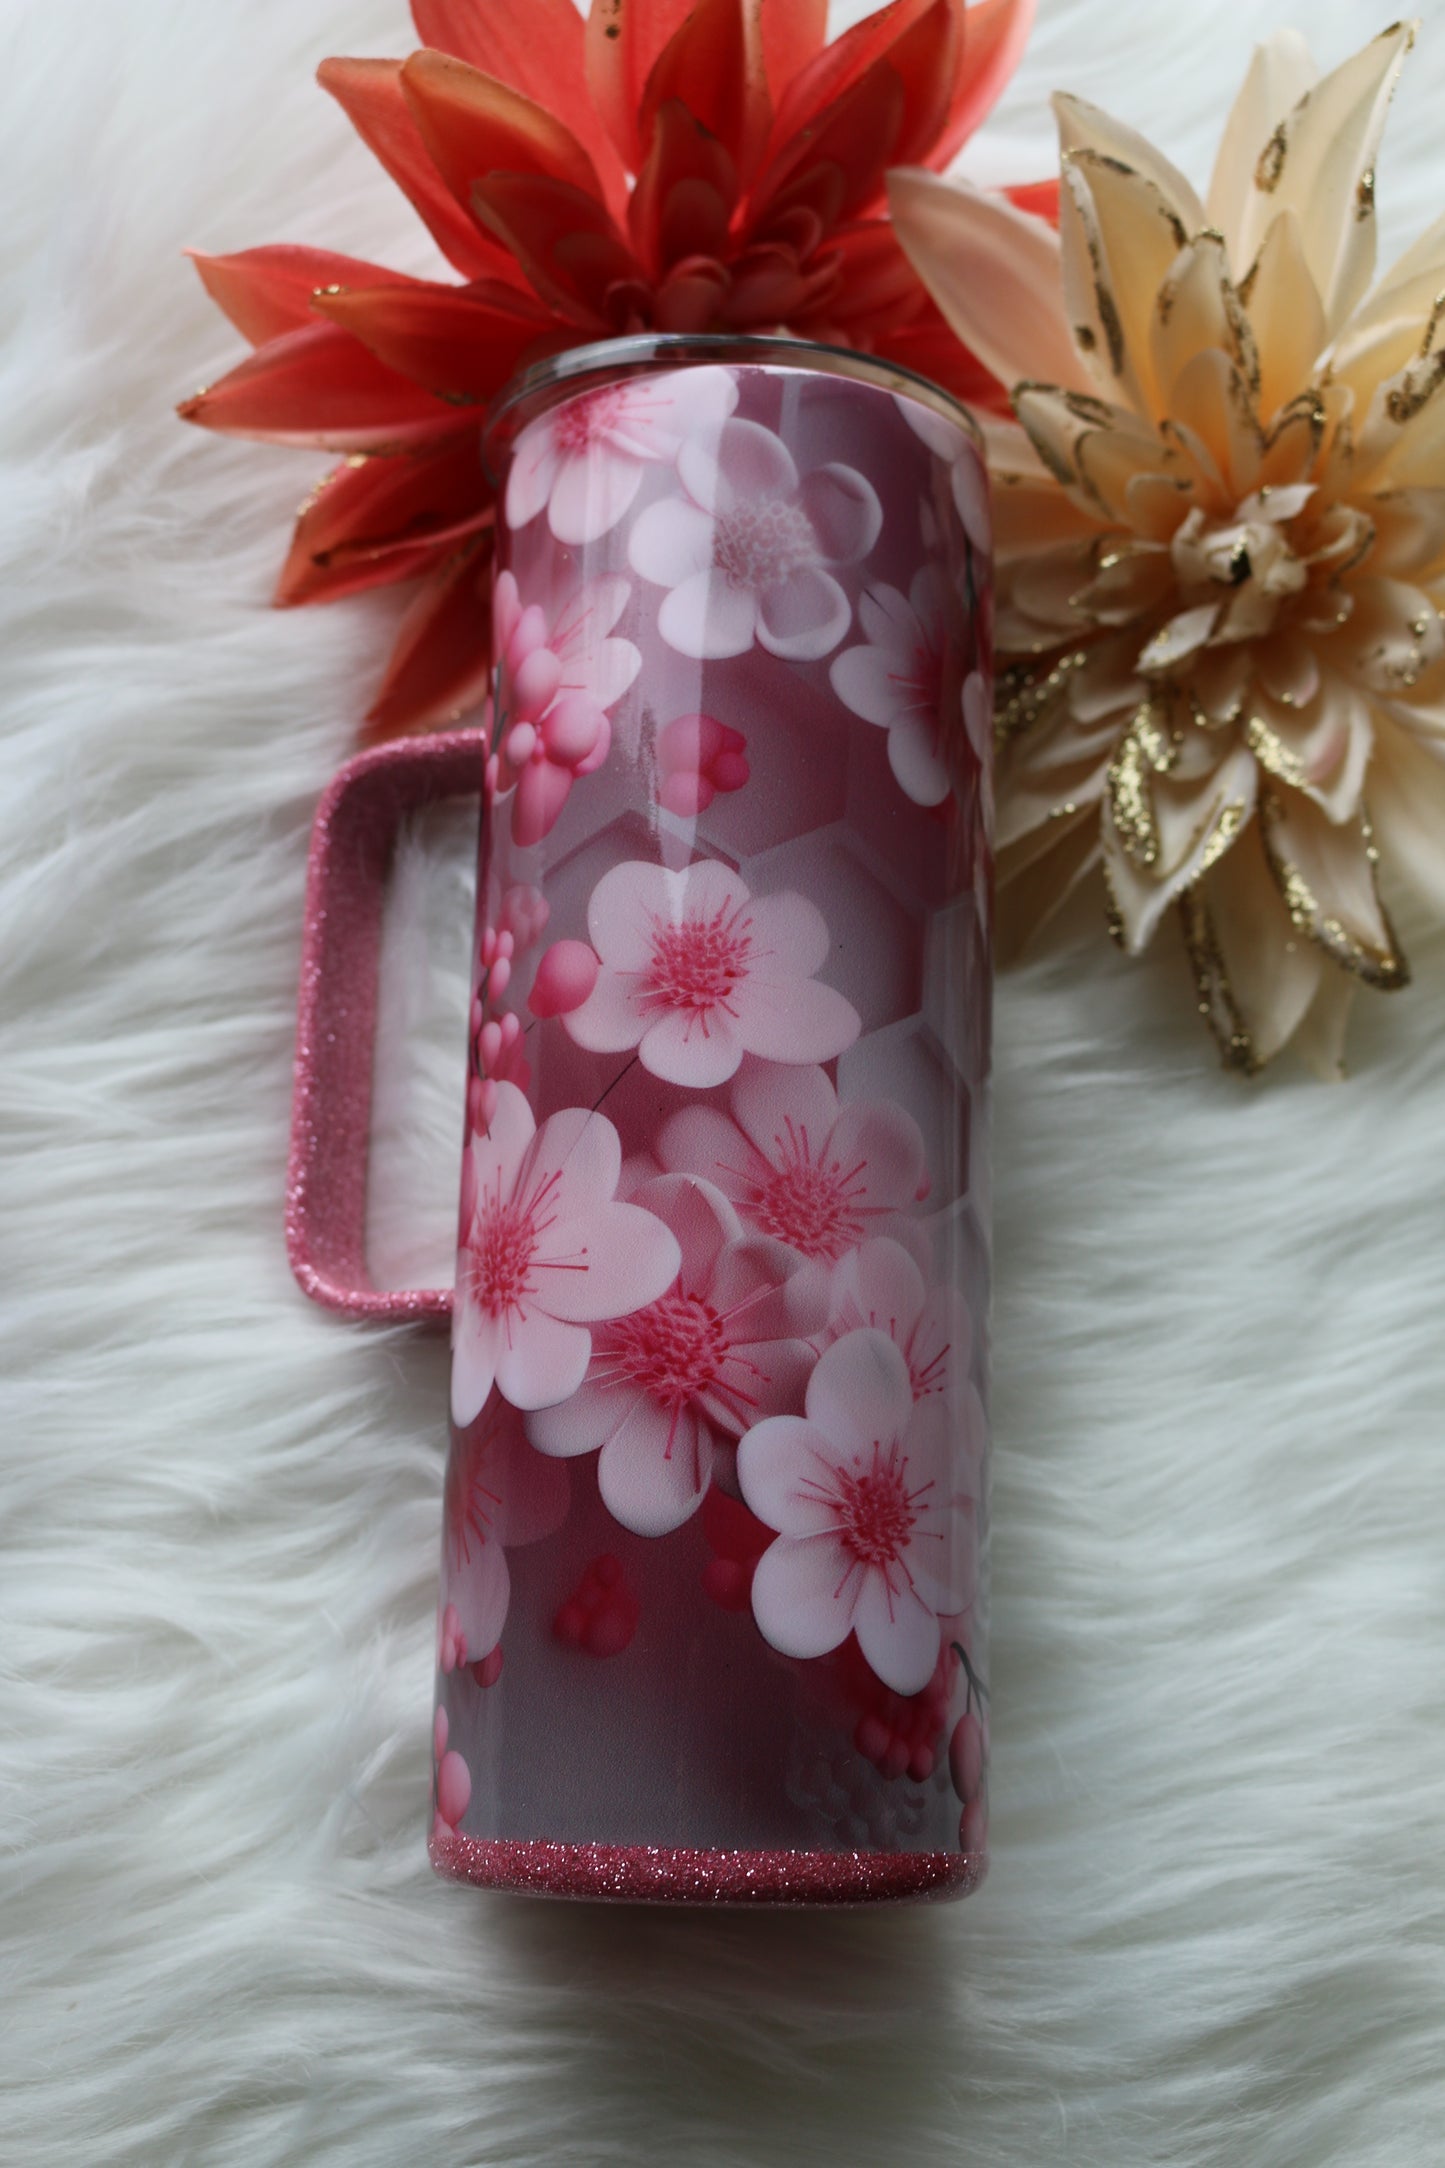 20 oz "honeycomb floral" Stainless Steal Tumbler with a handle